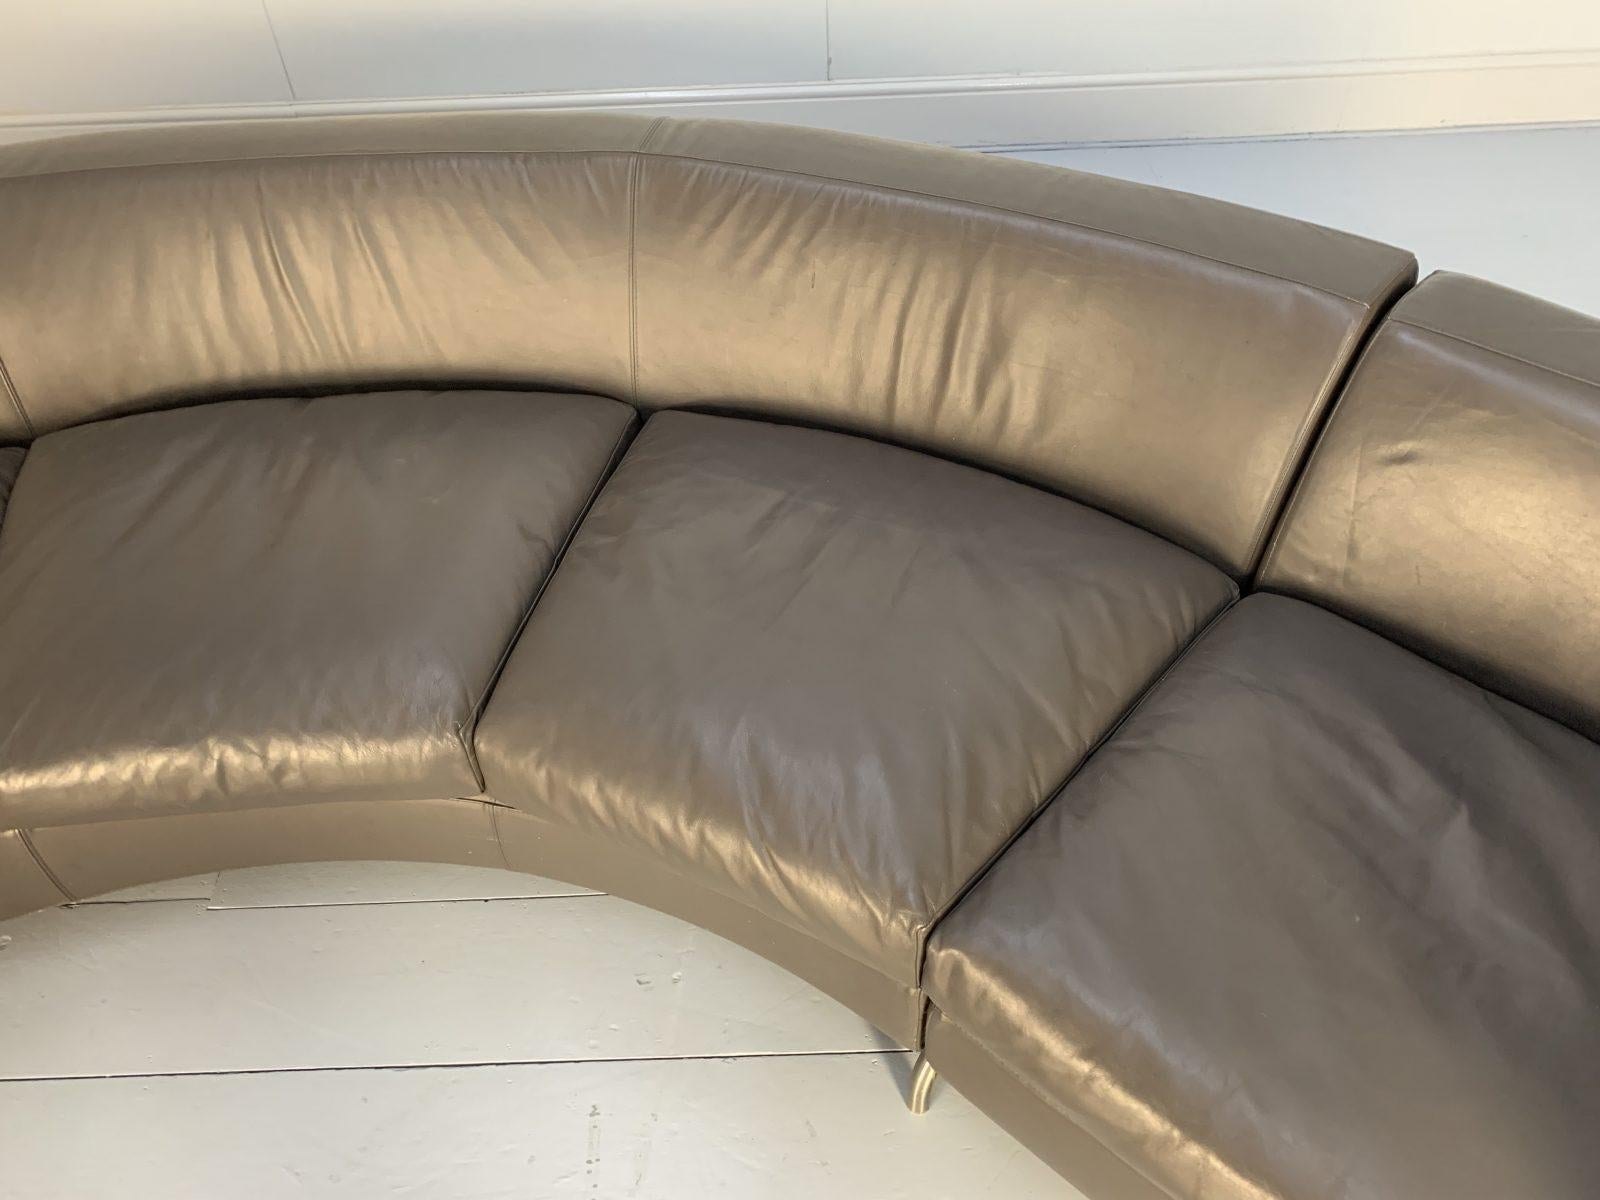 Rare Minotti “Dubuffet” Curved Sofa – in Dark Grey “Pelle” Leather For Sale 2